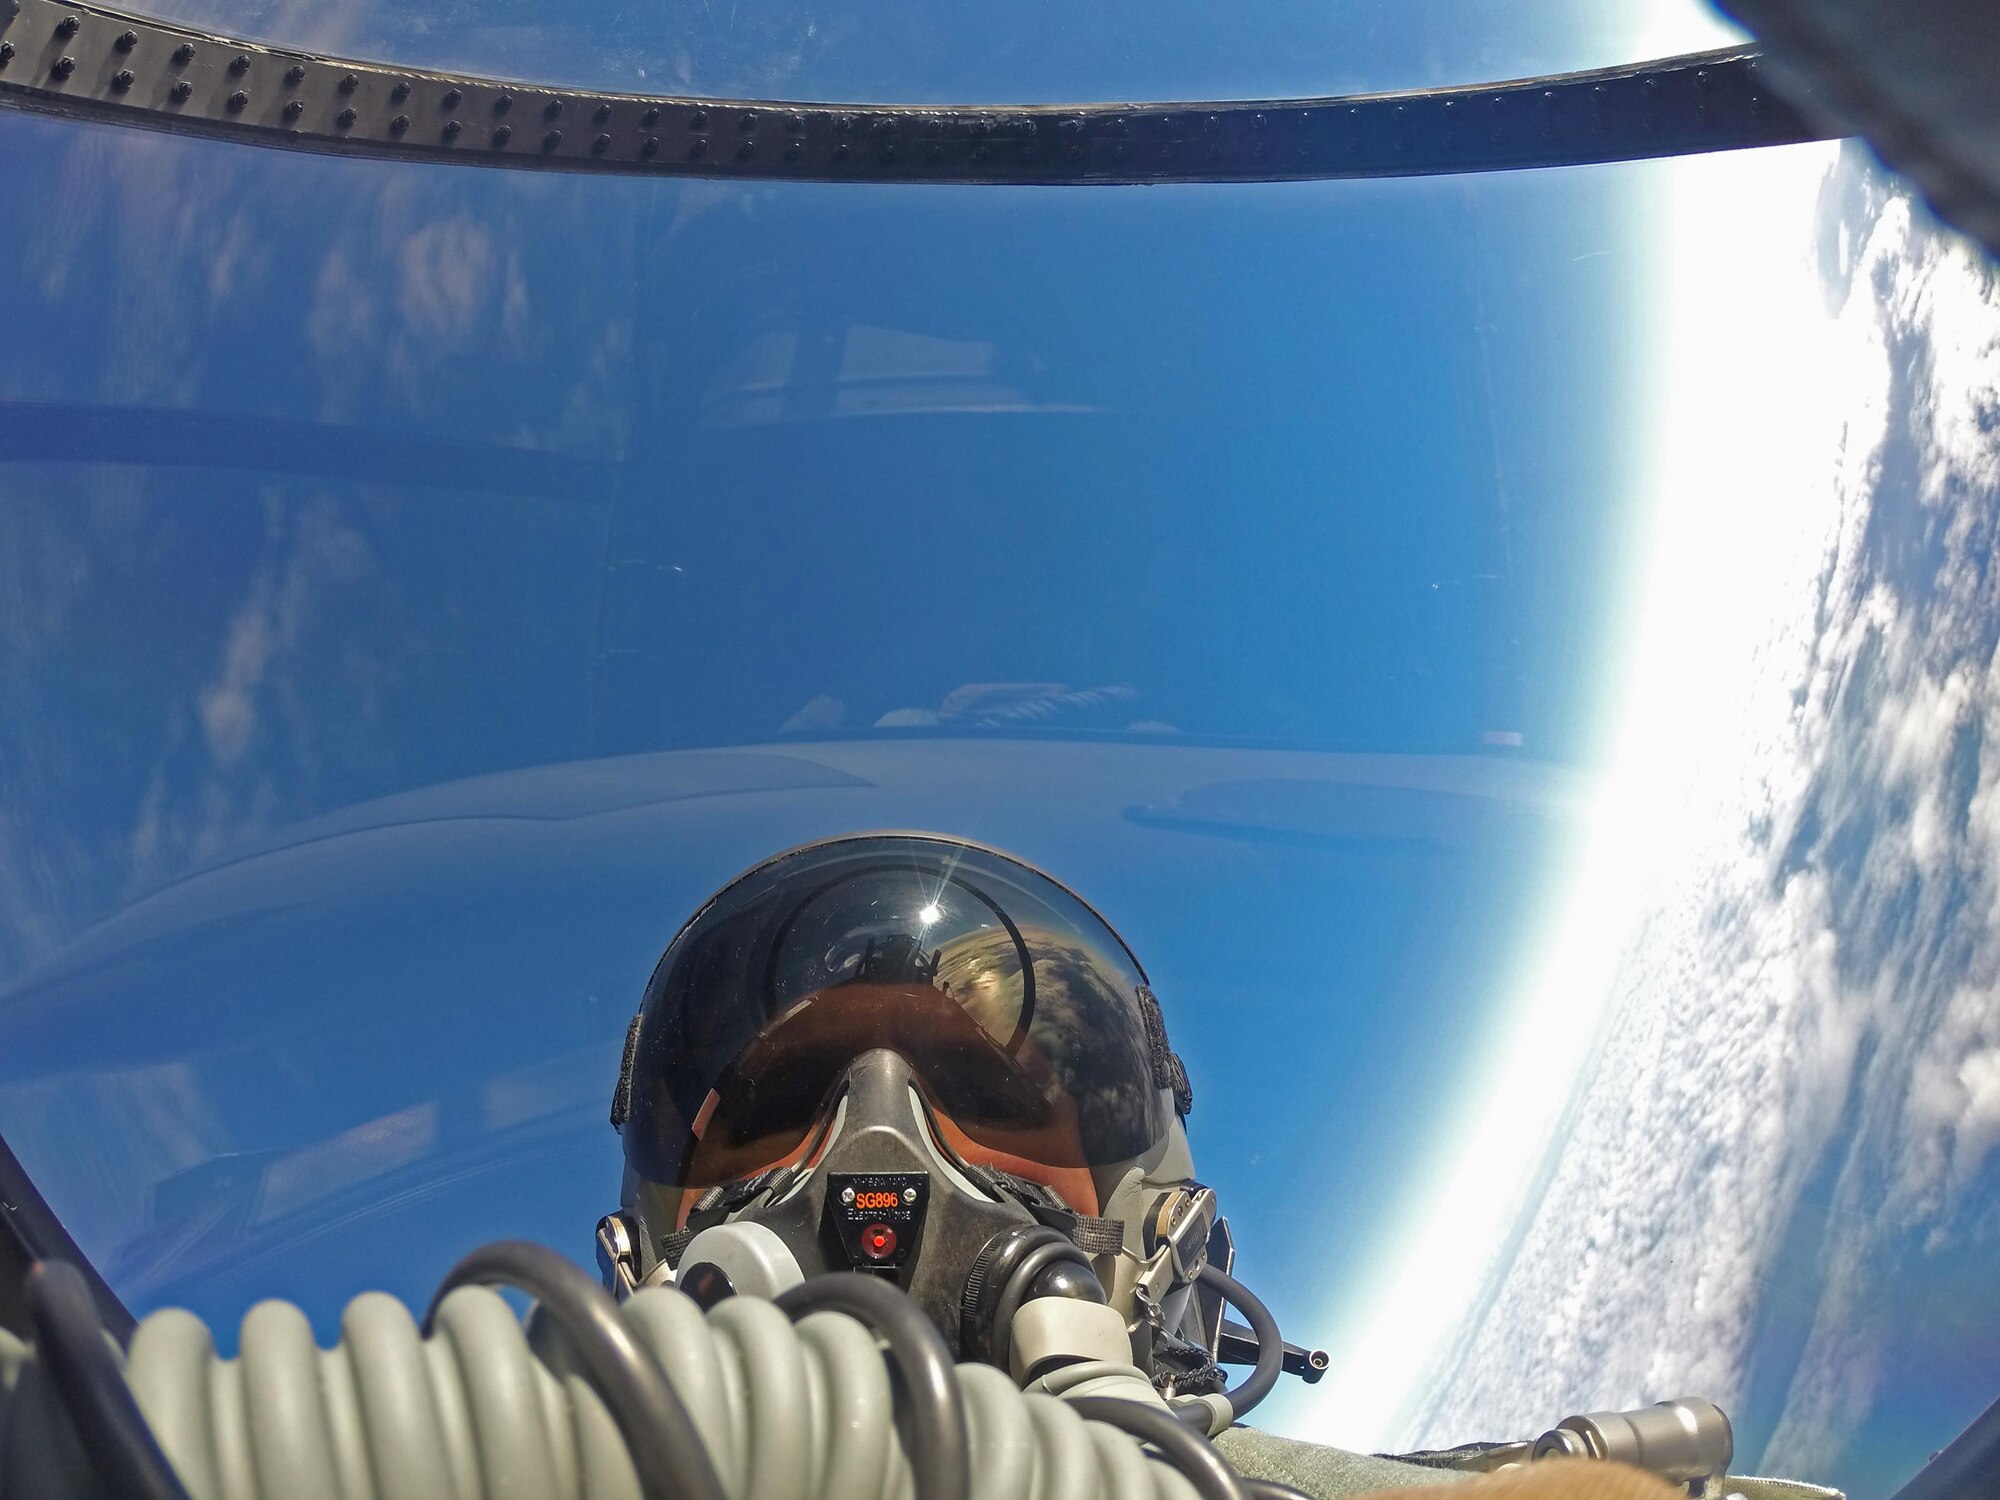 U.S. Air Force Col. Thomas Torkelson, 100th Air Refueling Wing commander at RAF Mildenhall, England, takes a “selfie” in the back of an F-15D Eagle assigned to the 48th Fighter Wing from RAF Lakenheath, England, Dec. 2, 2016, over the Atlantic Ocean. Torkelson flew with the 48th Fighter Wing to experience first-hand their role in securing peace through strength. (U.S. Air Force photo by Col. Thomas Torkelson)